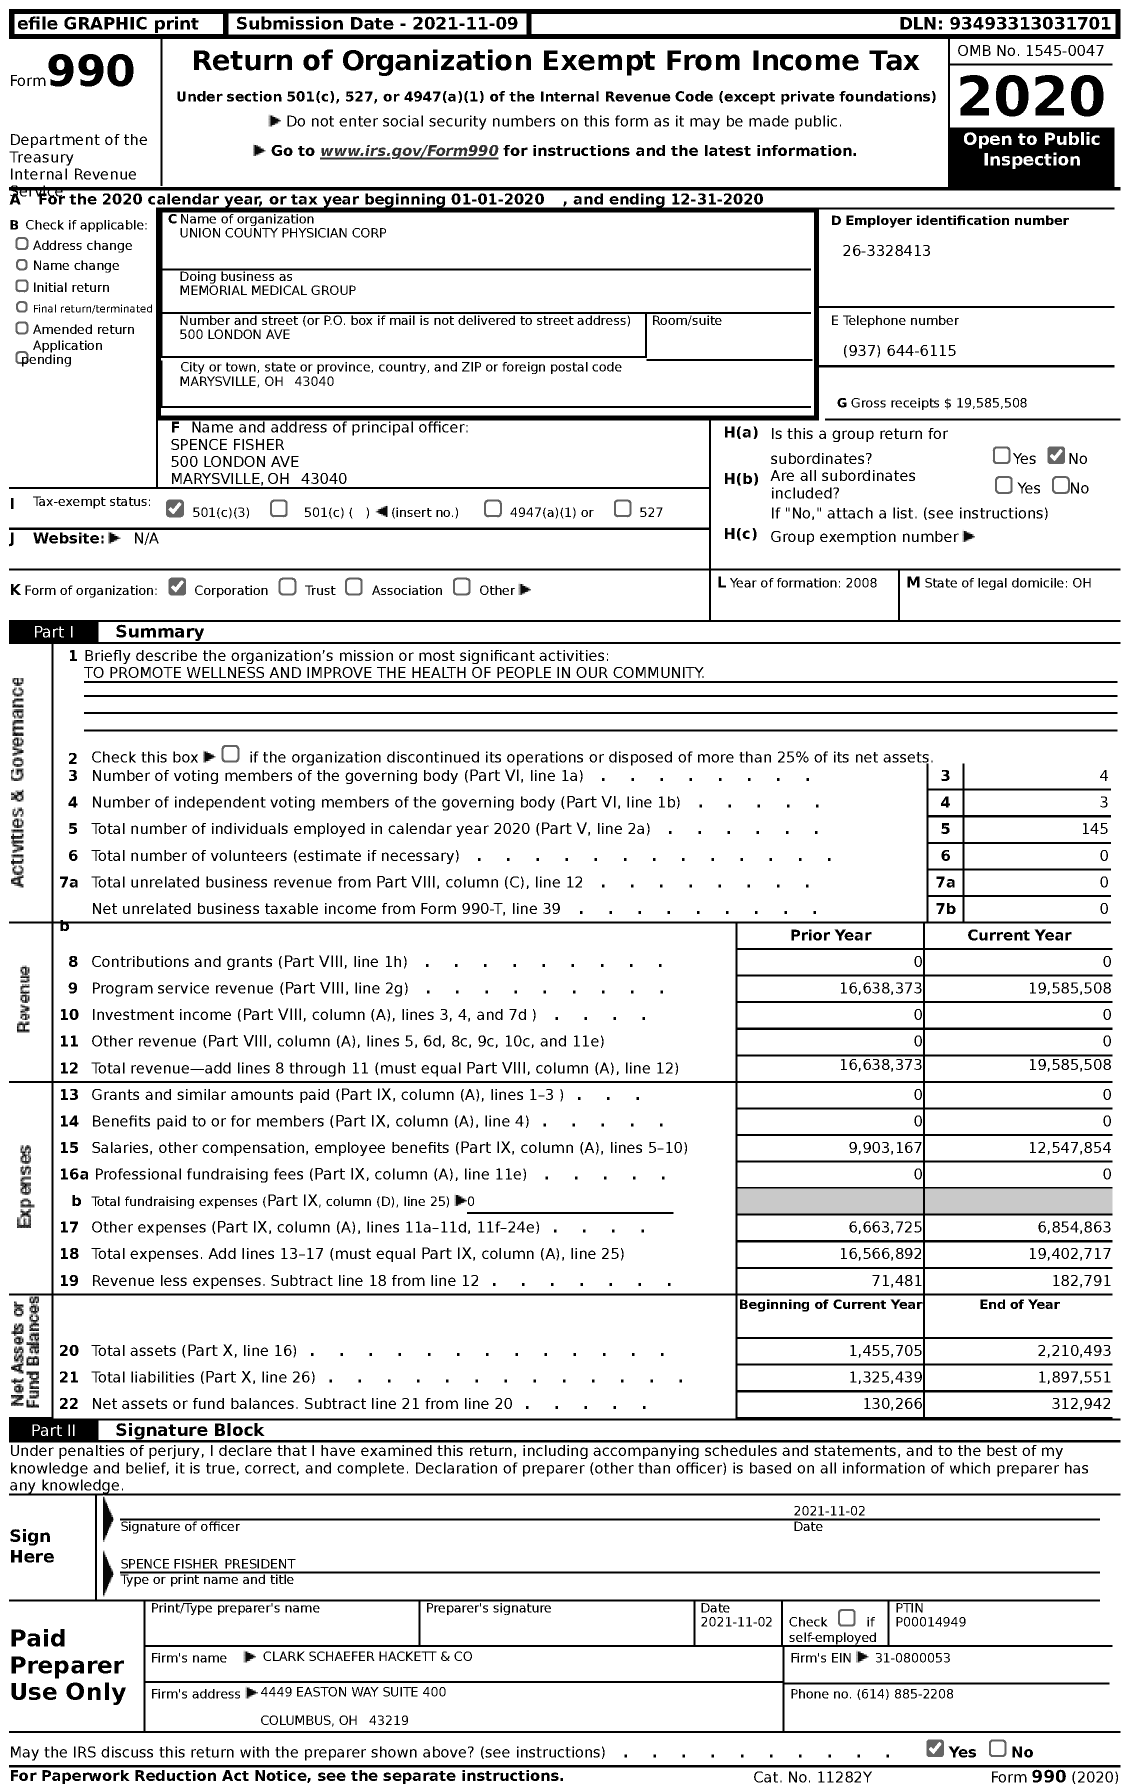 Image of first page of 2020 Form 990 for Memorial Medical Group / Union County Physician Corp